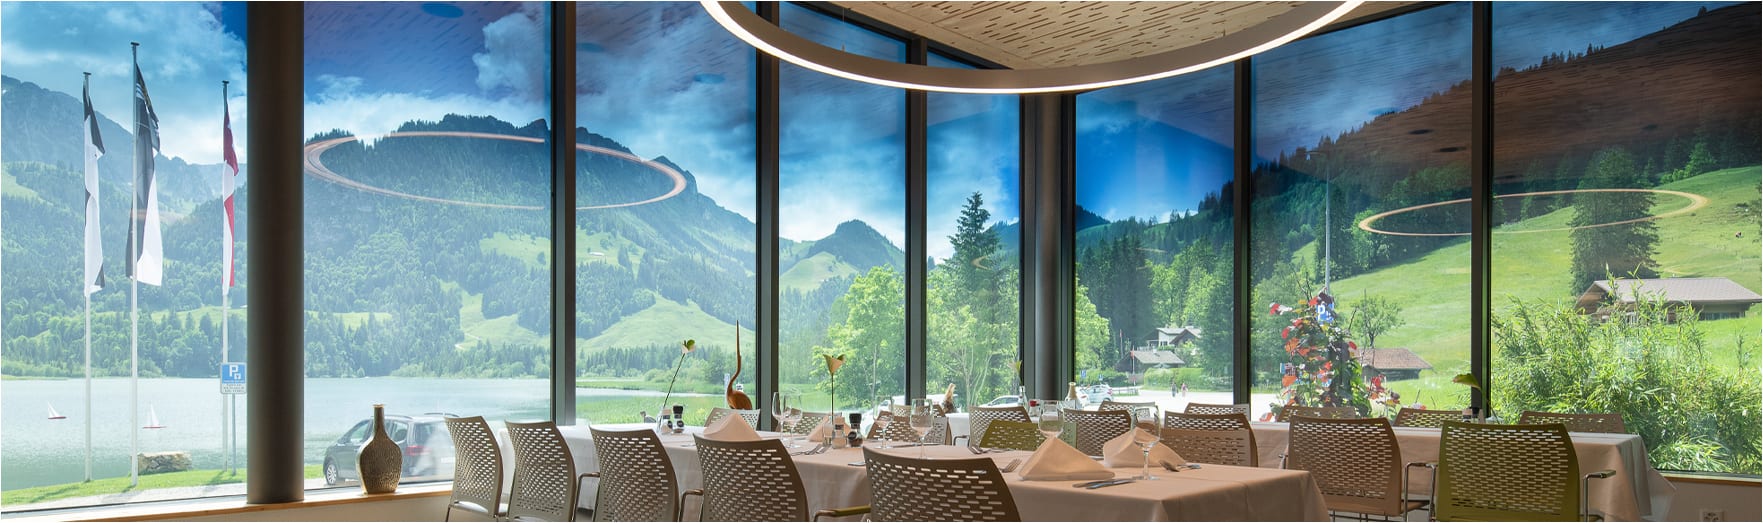 Interior view of a restaurant looking outward  at a beautiful mountain view